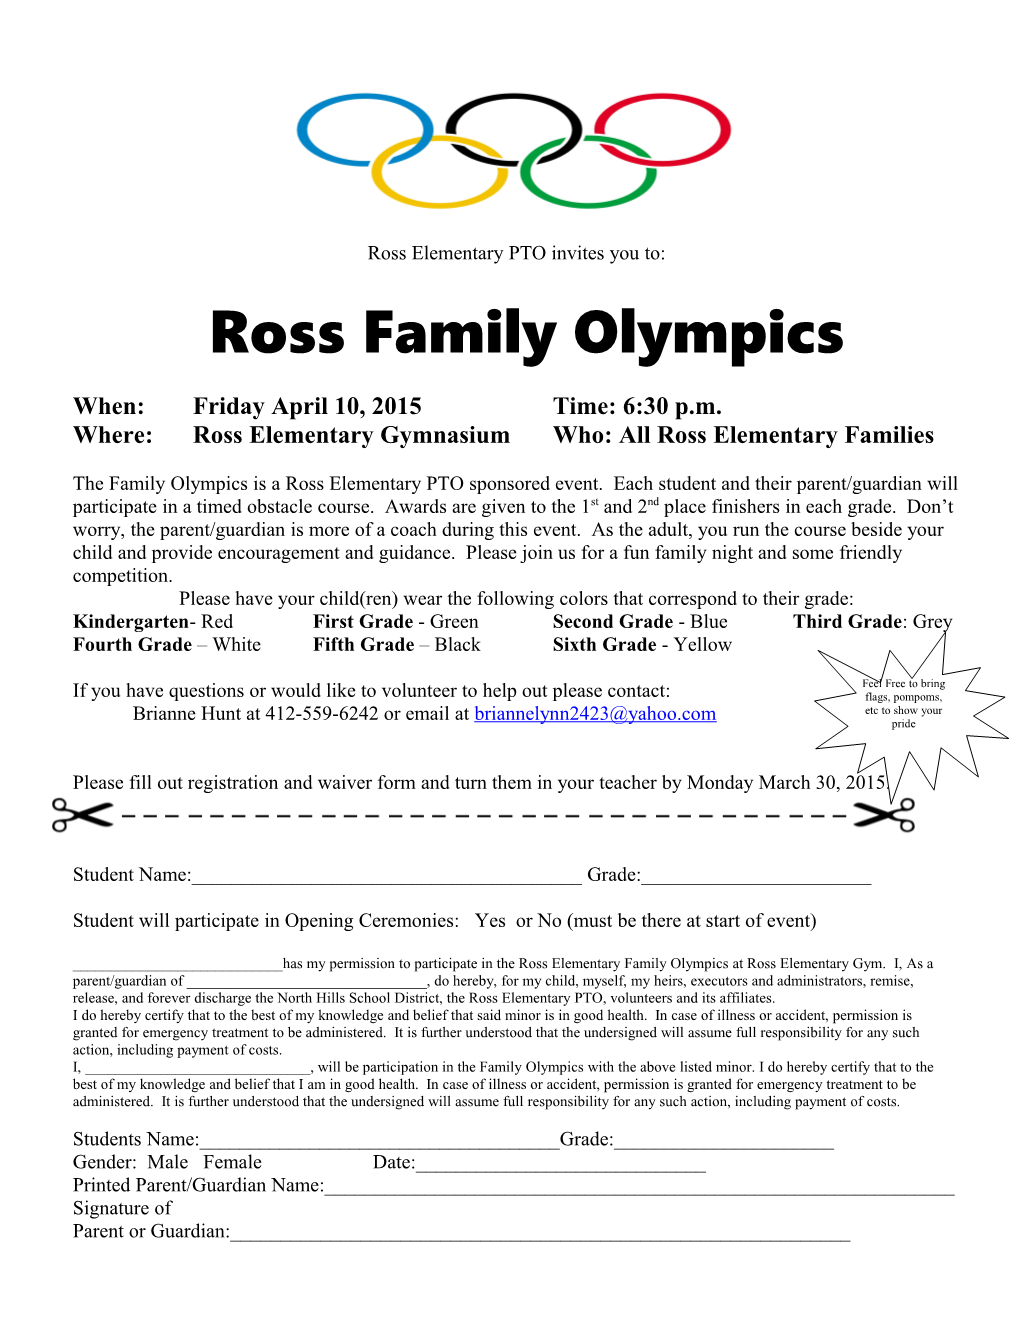 Where:Ross Elementary Gymnasiumwho: All Ross Elementary Families